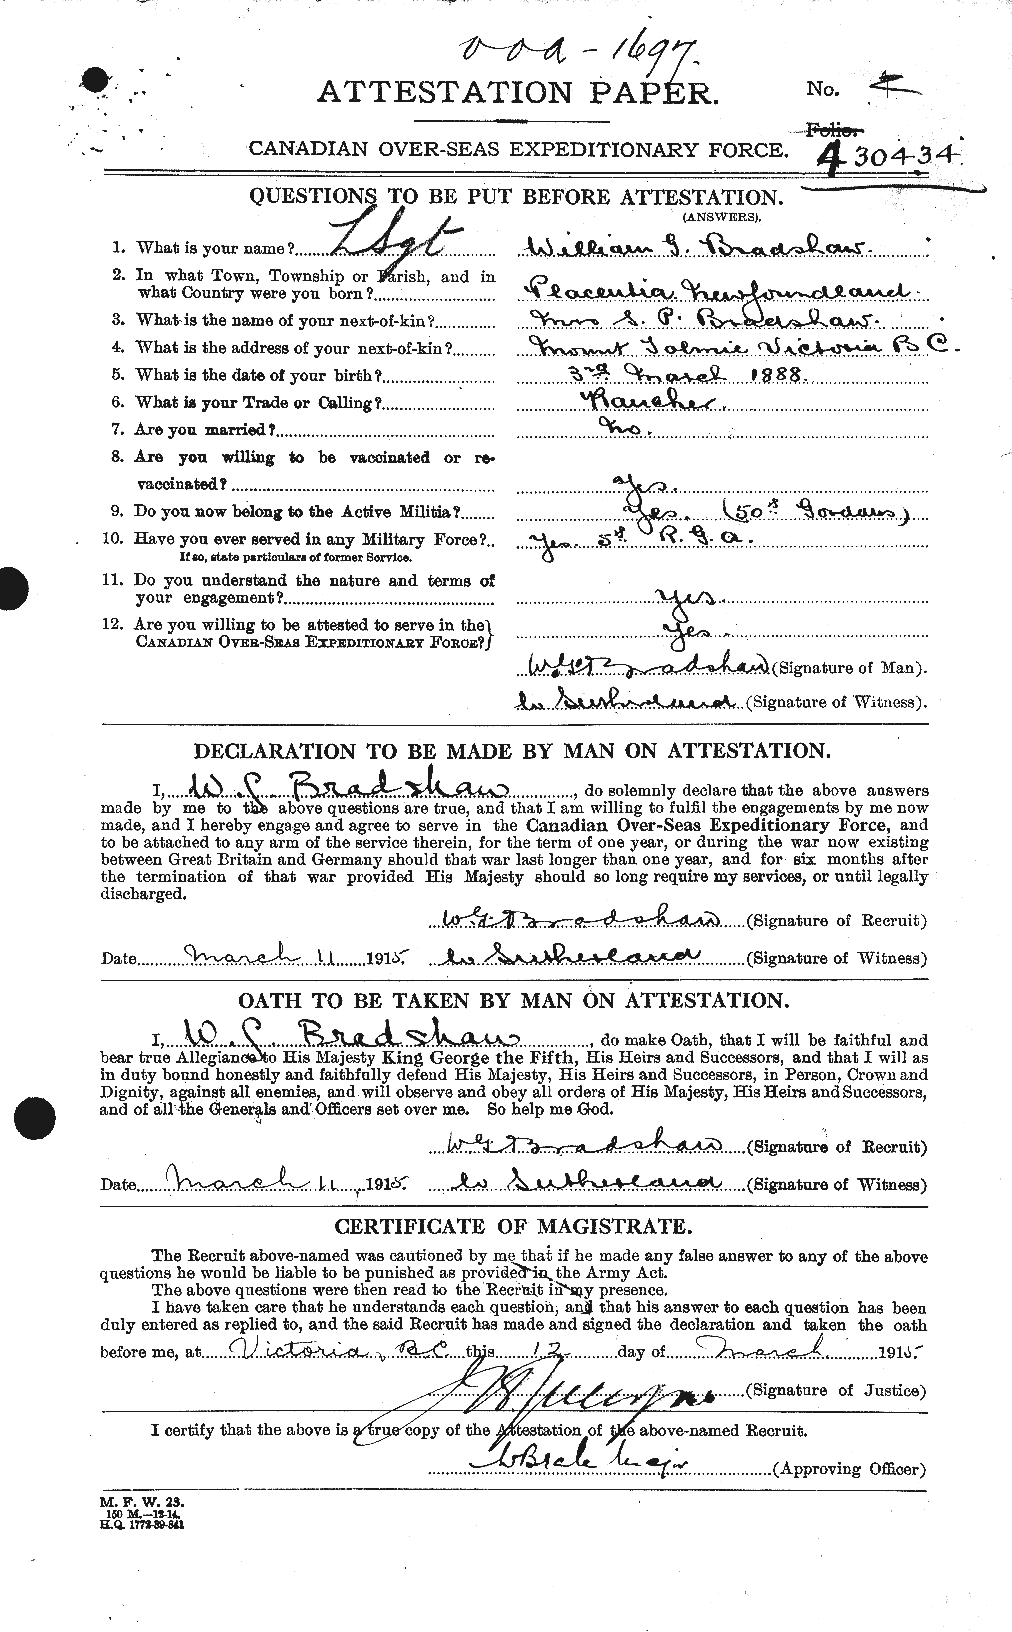 Personnel Records of the First World War - CEF 256697a